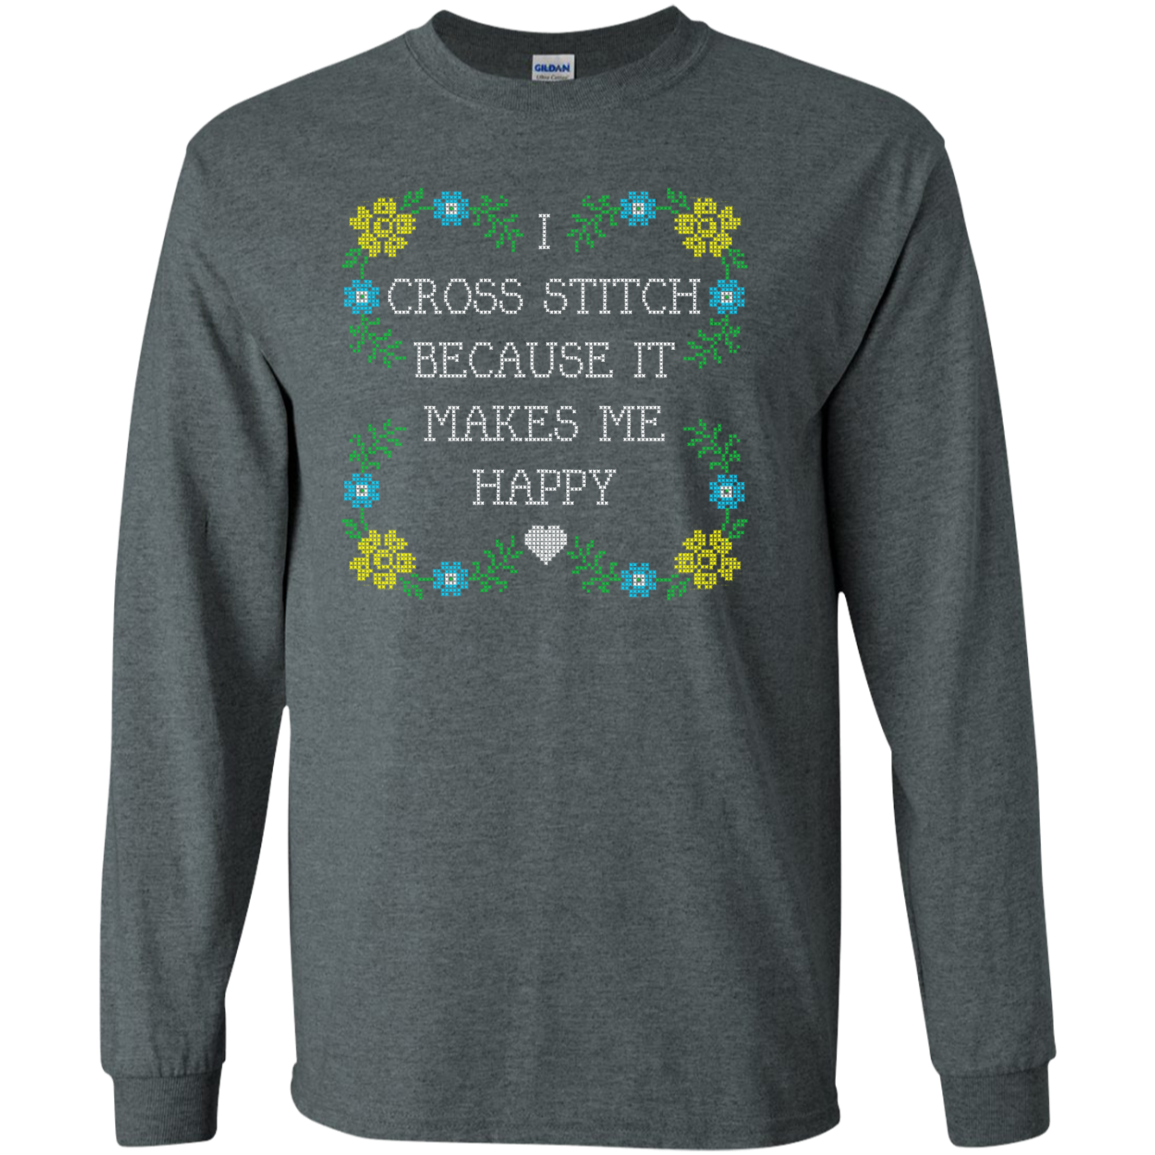 I Cross Stitch Because It Makes Me Happy Long Sleeve Ultra Cotton T-Shirt - Crafter4Life - 6